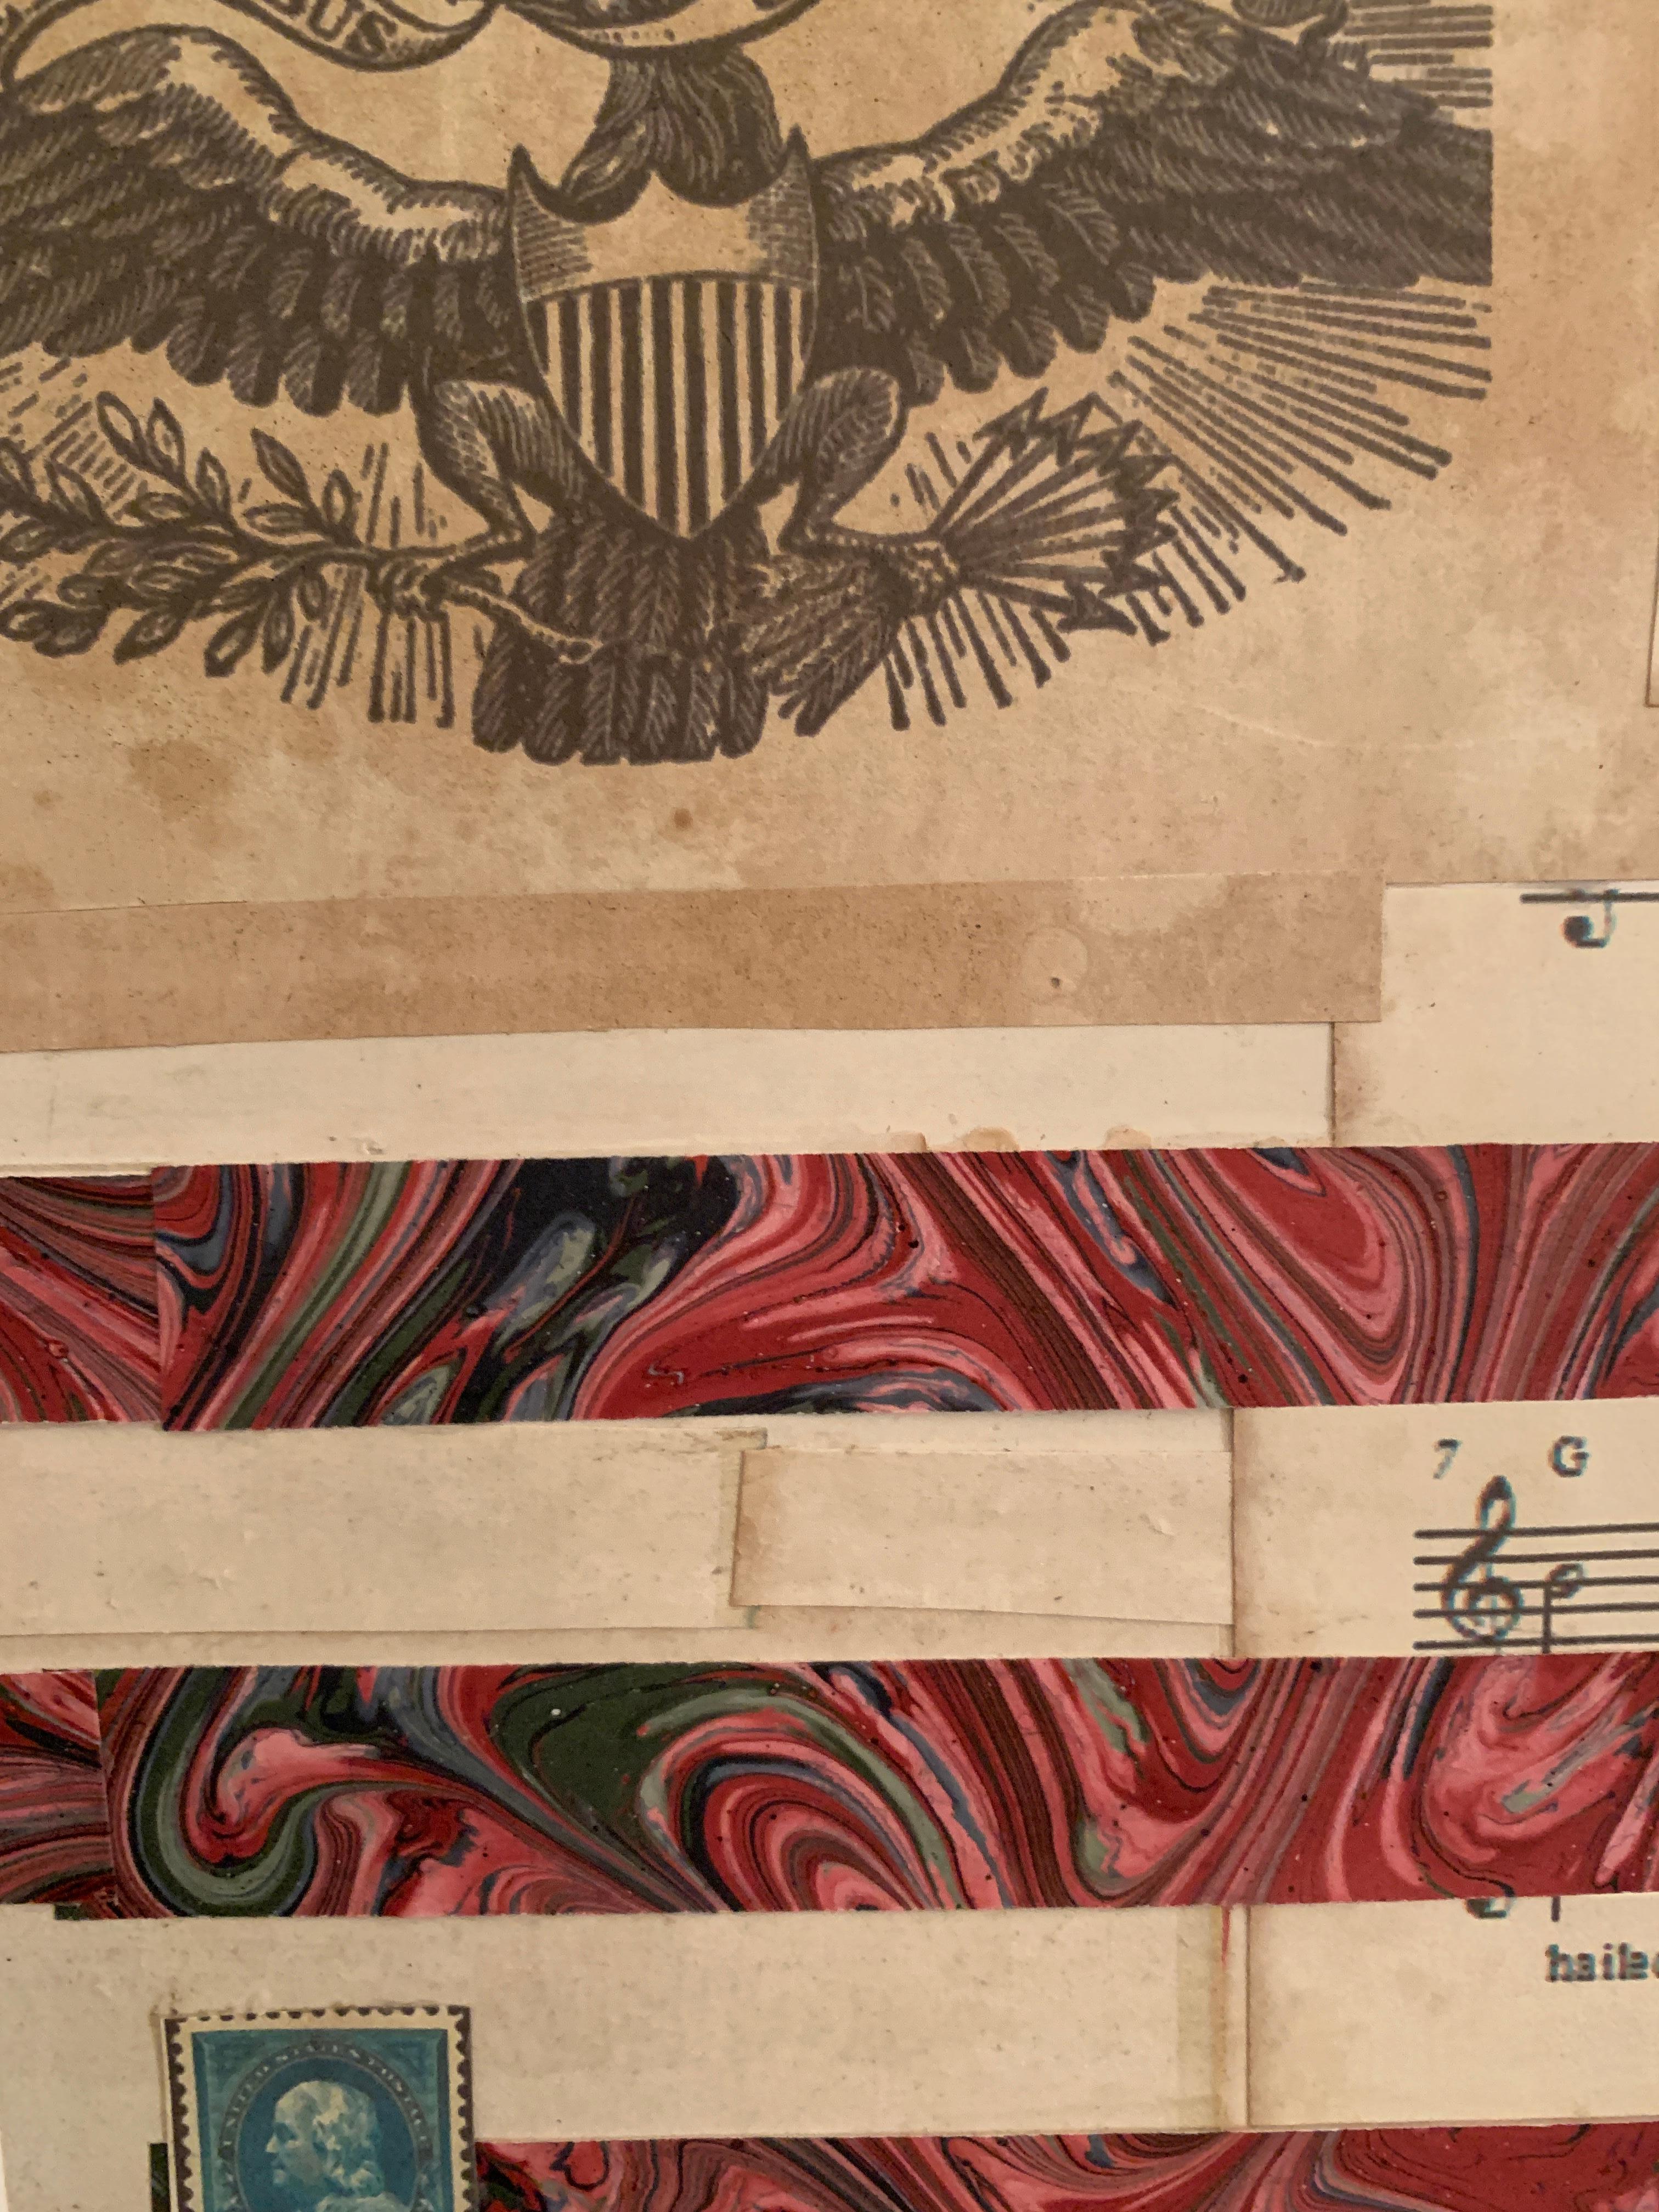 American flag collage with a 19th century engraving of an eagle  - American Modern Mixed Media Art by Claude Howard Stuart